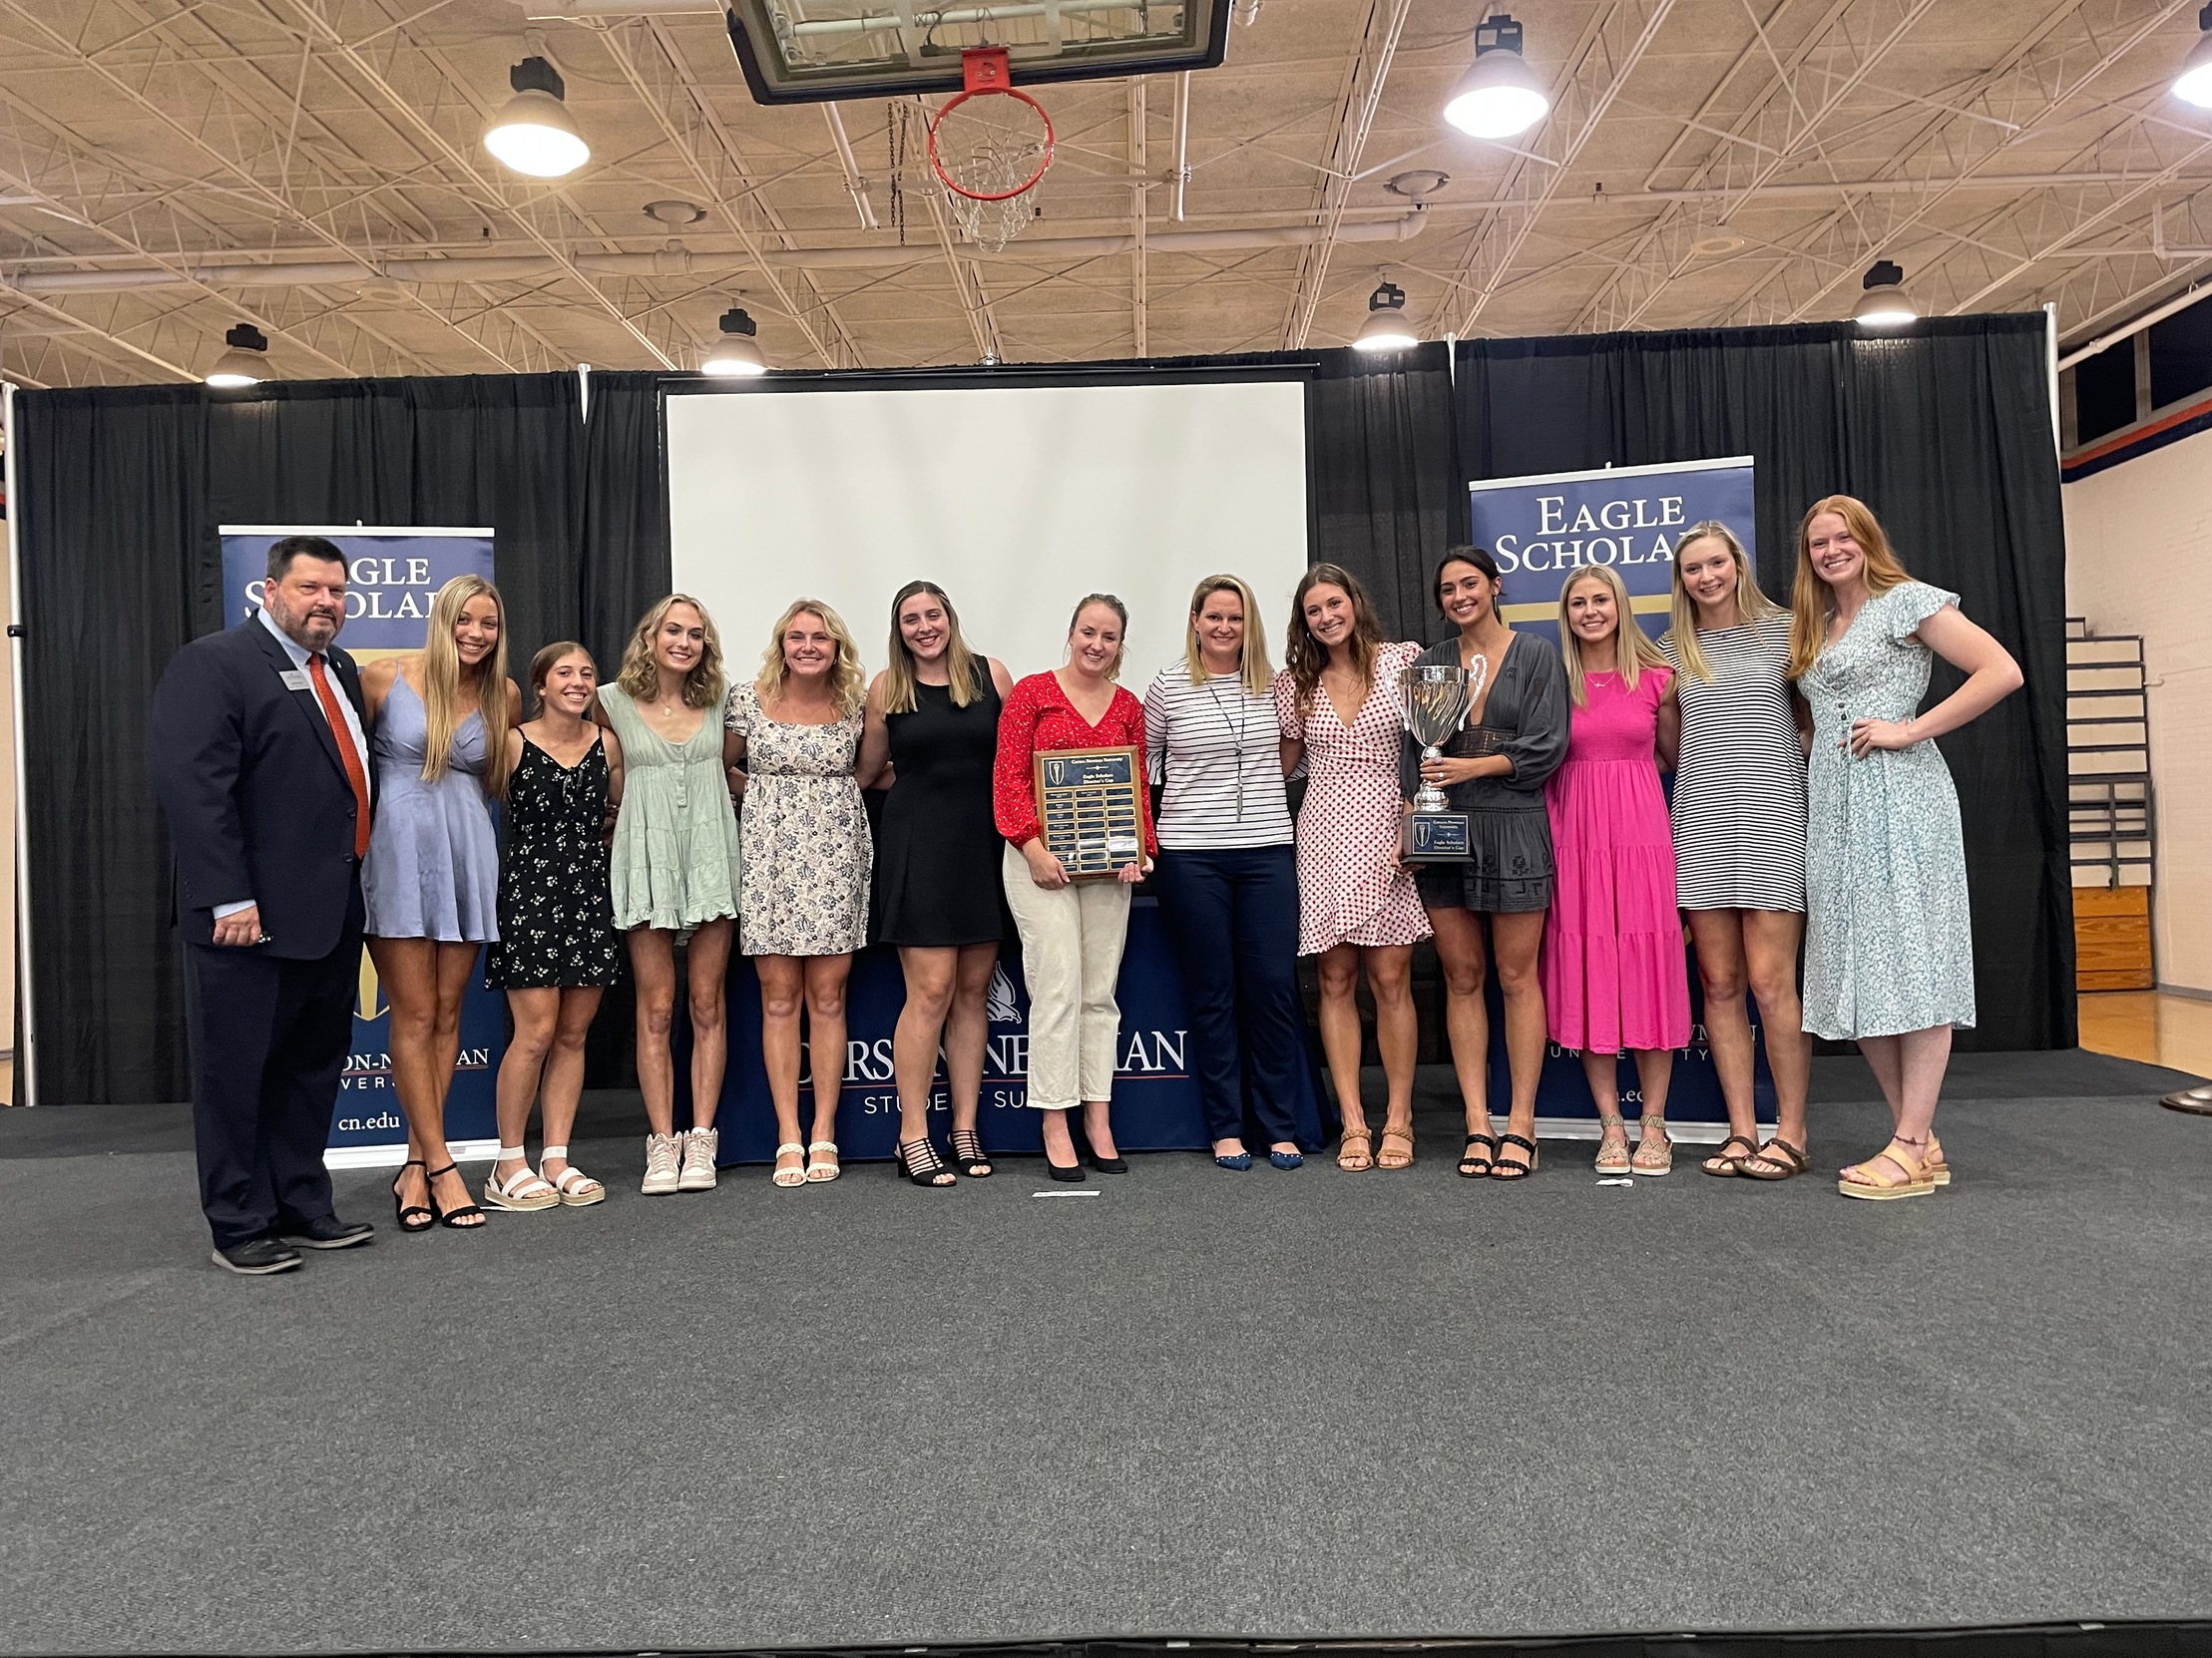 Beach volleyball presented Director's Cup at 10th Annual Eagle Scholars Ceremony